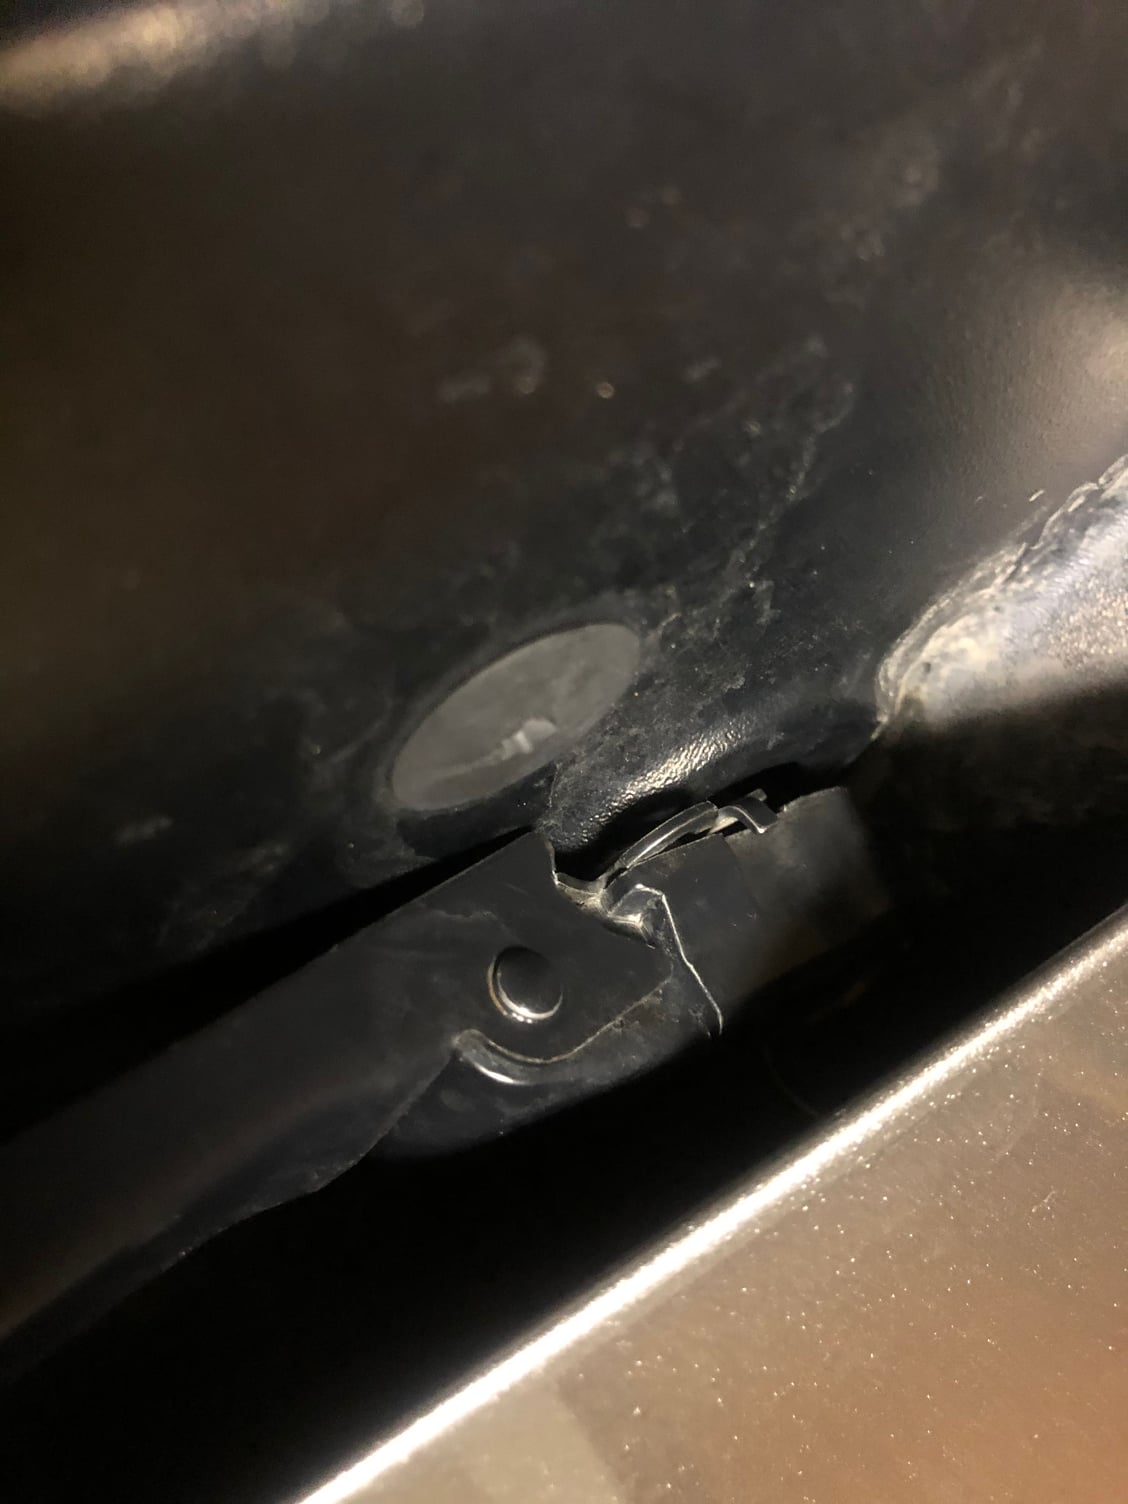 Wiper blade stuck out - Jeep Cherokee Forum 2011 Jeep Grand Cherokee Rear Wiper Not Working